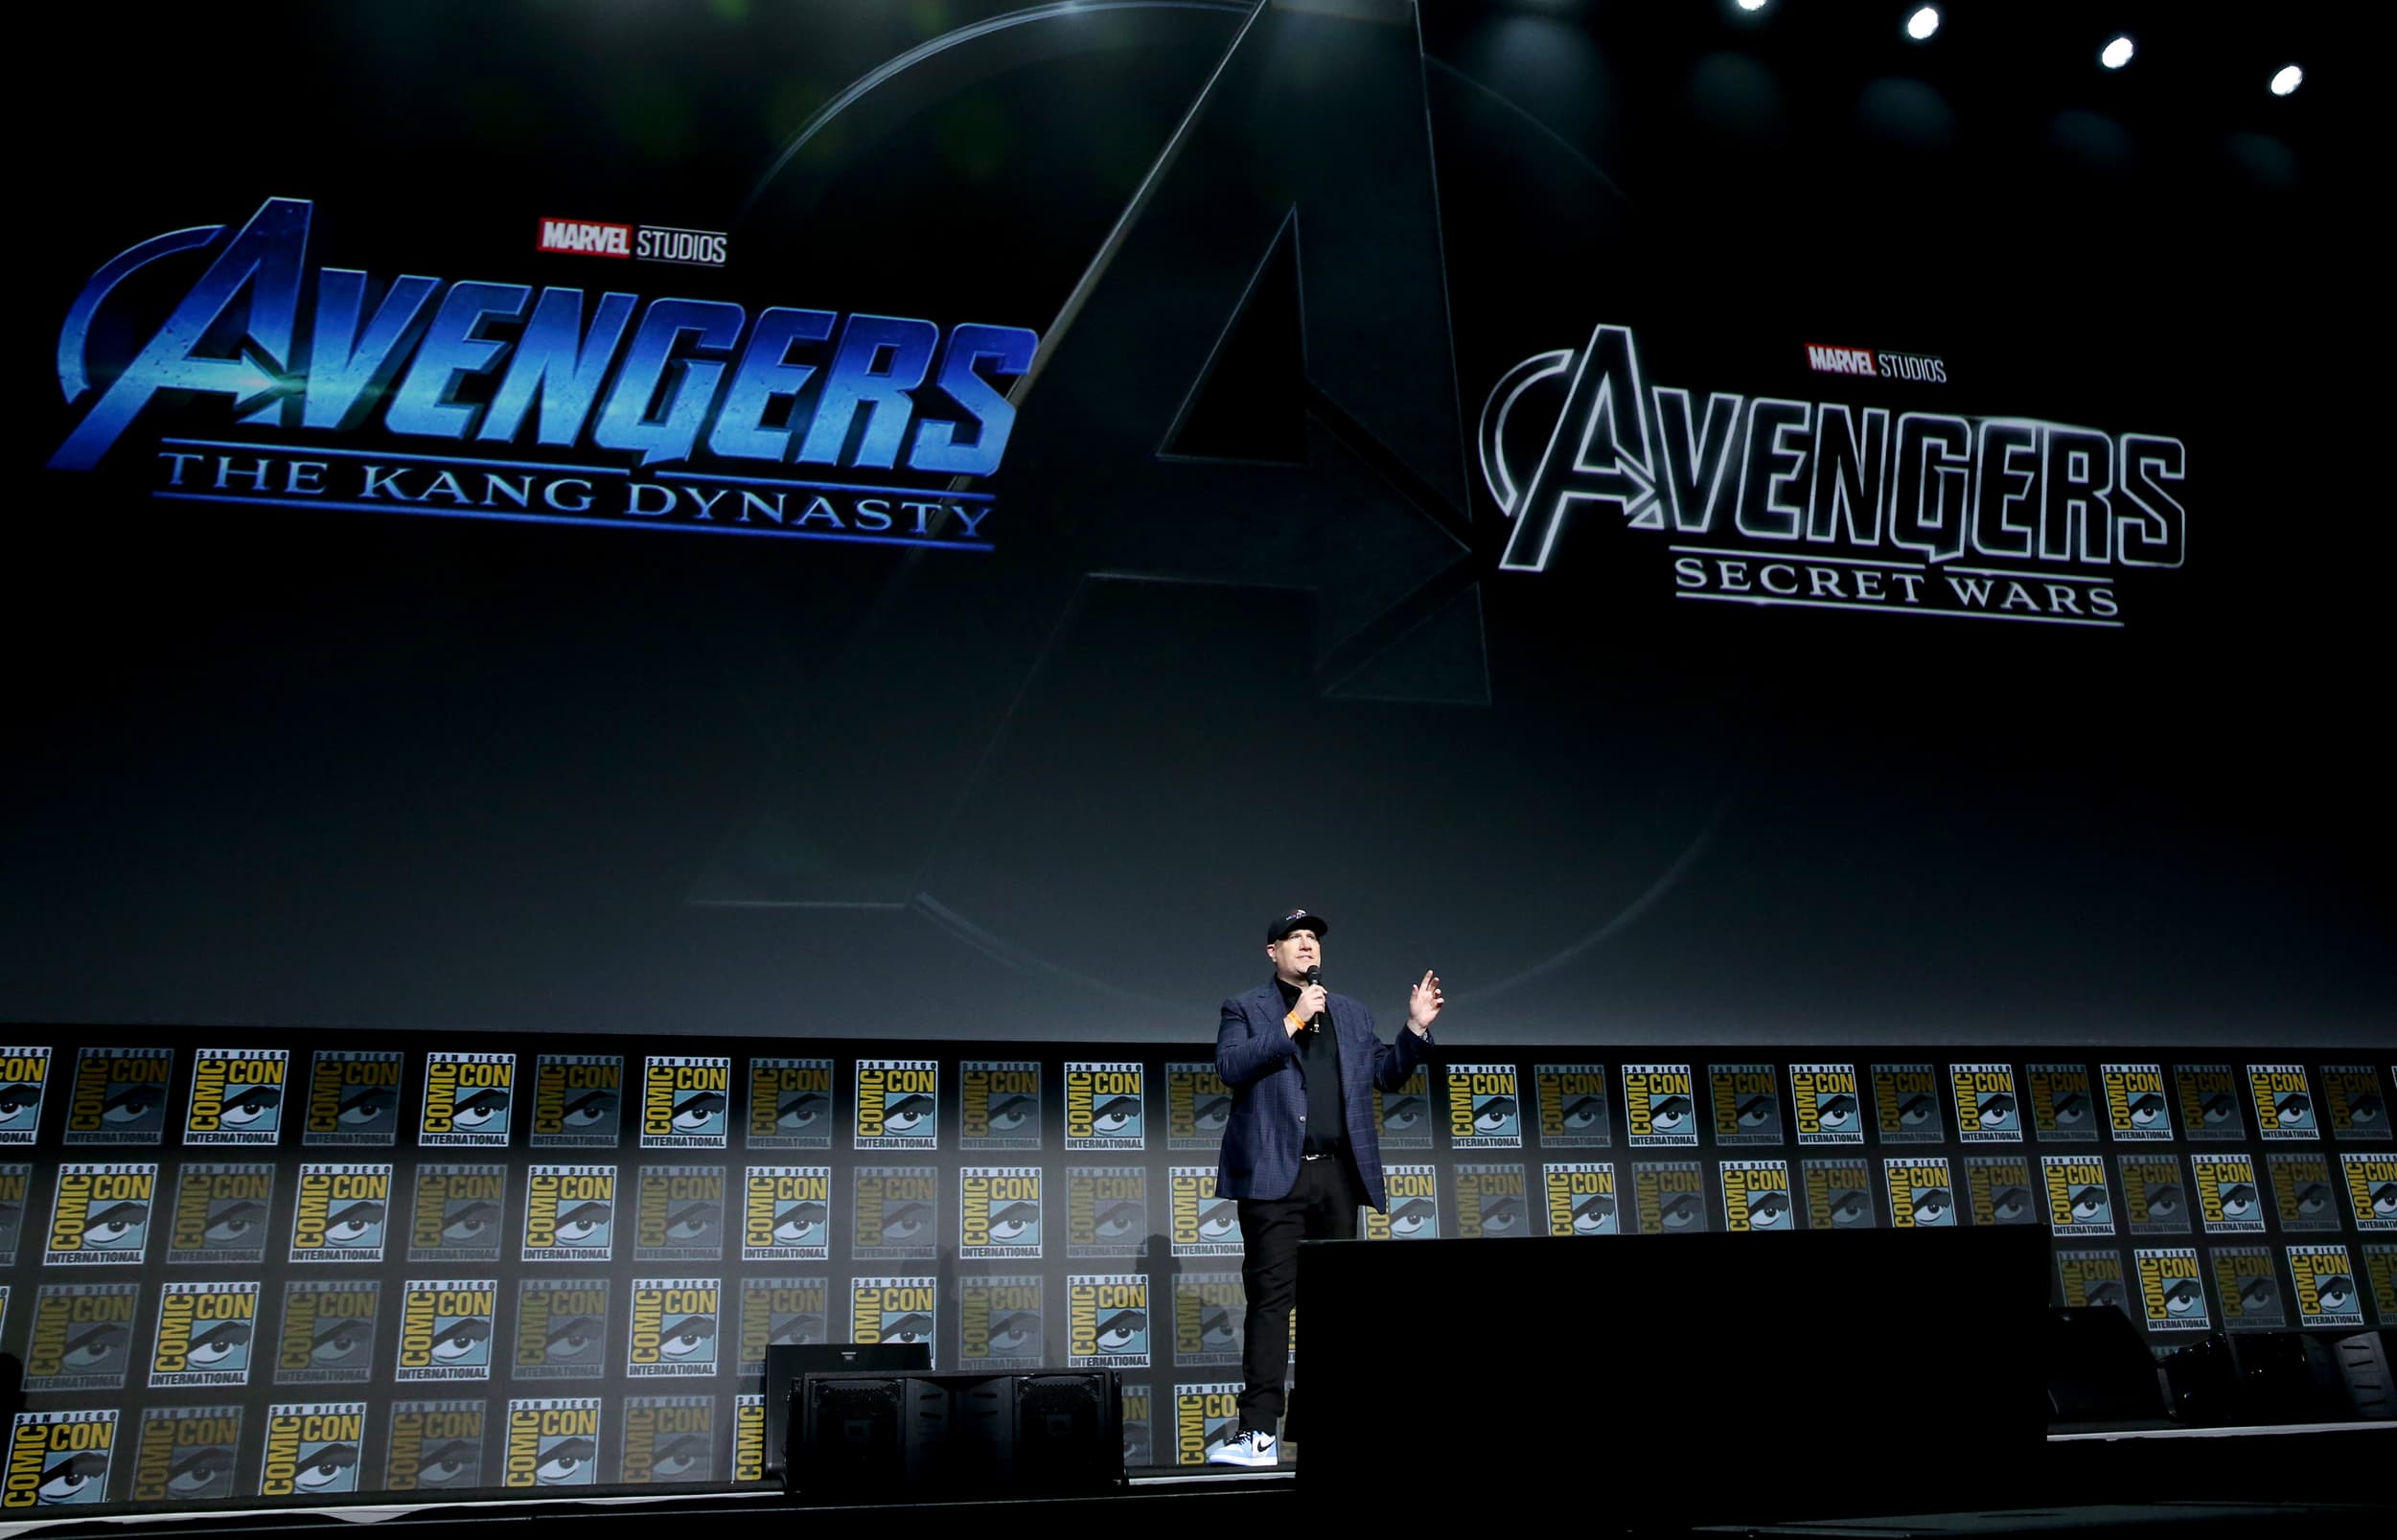 Marvel Studios President Kevin Feige announces Marvel Studios' 'Avengers: The Kang Dynasty' and Marvel Studios' 'Avengers: Secret Wars' from Hall H at San Diego Comic-Con 2022